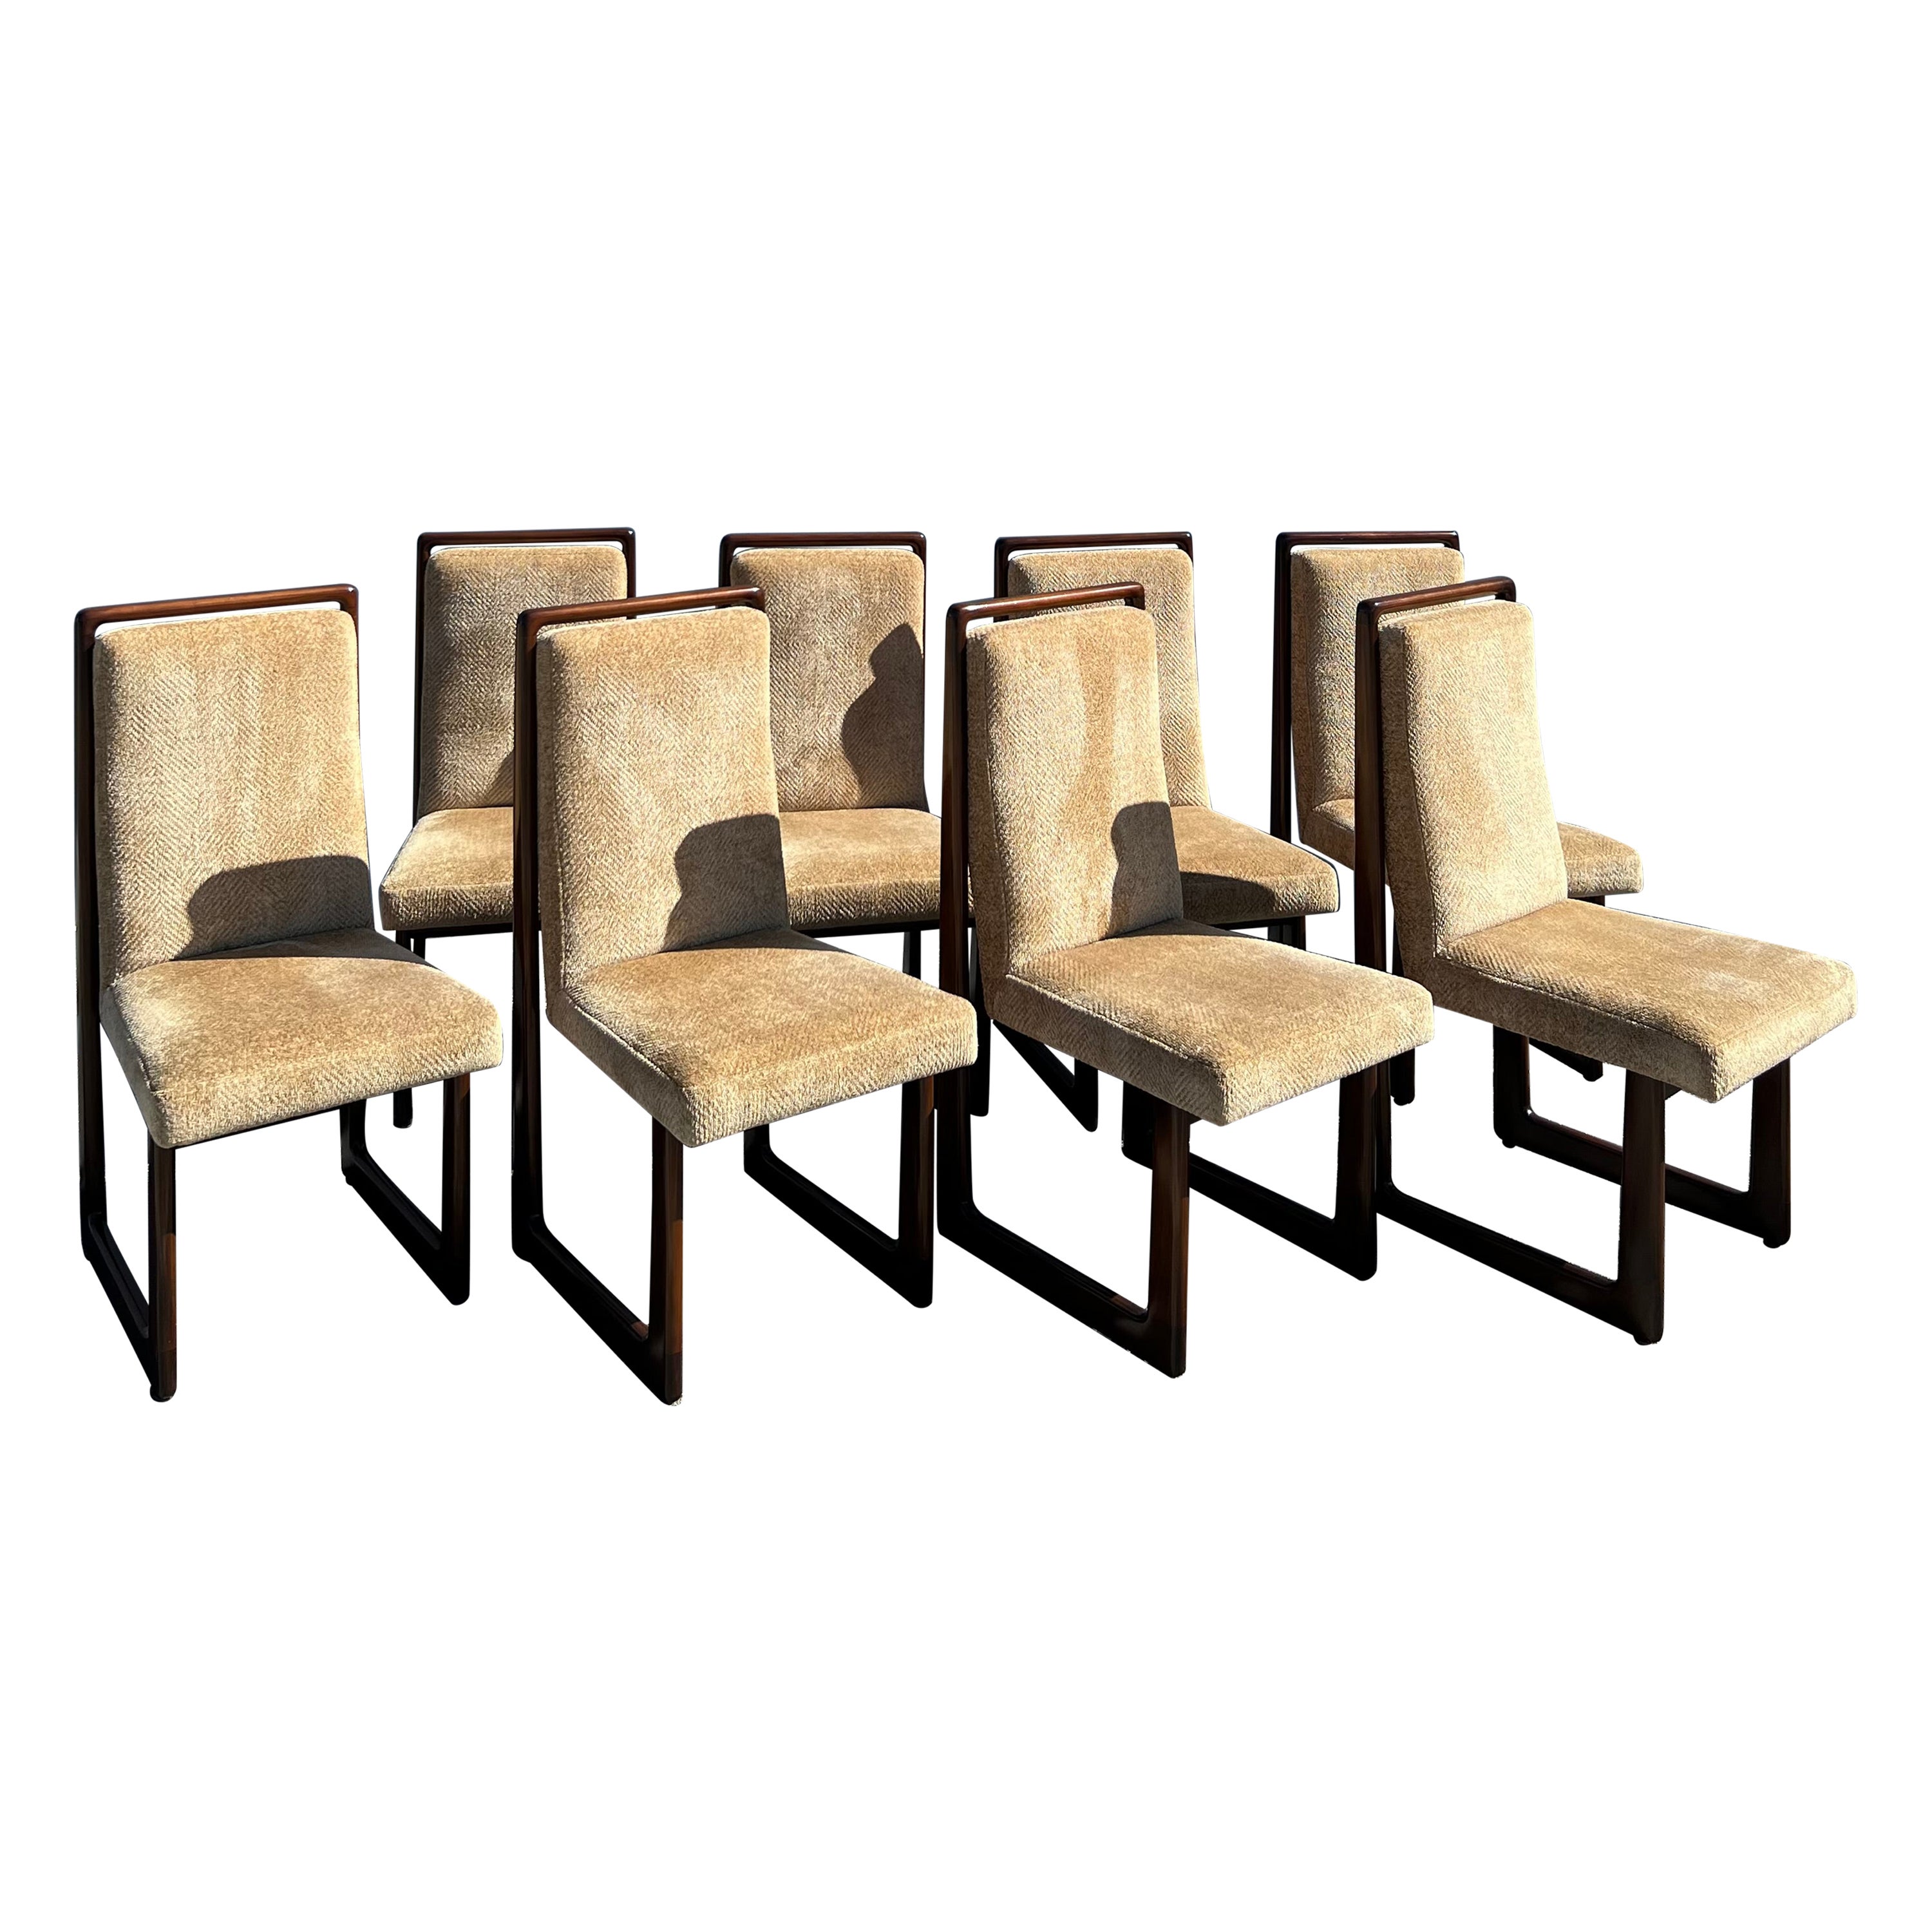 Vladimir Kagan Cubist Dining Chairs- Set Of 8 For Sale